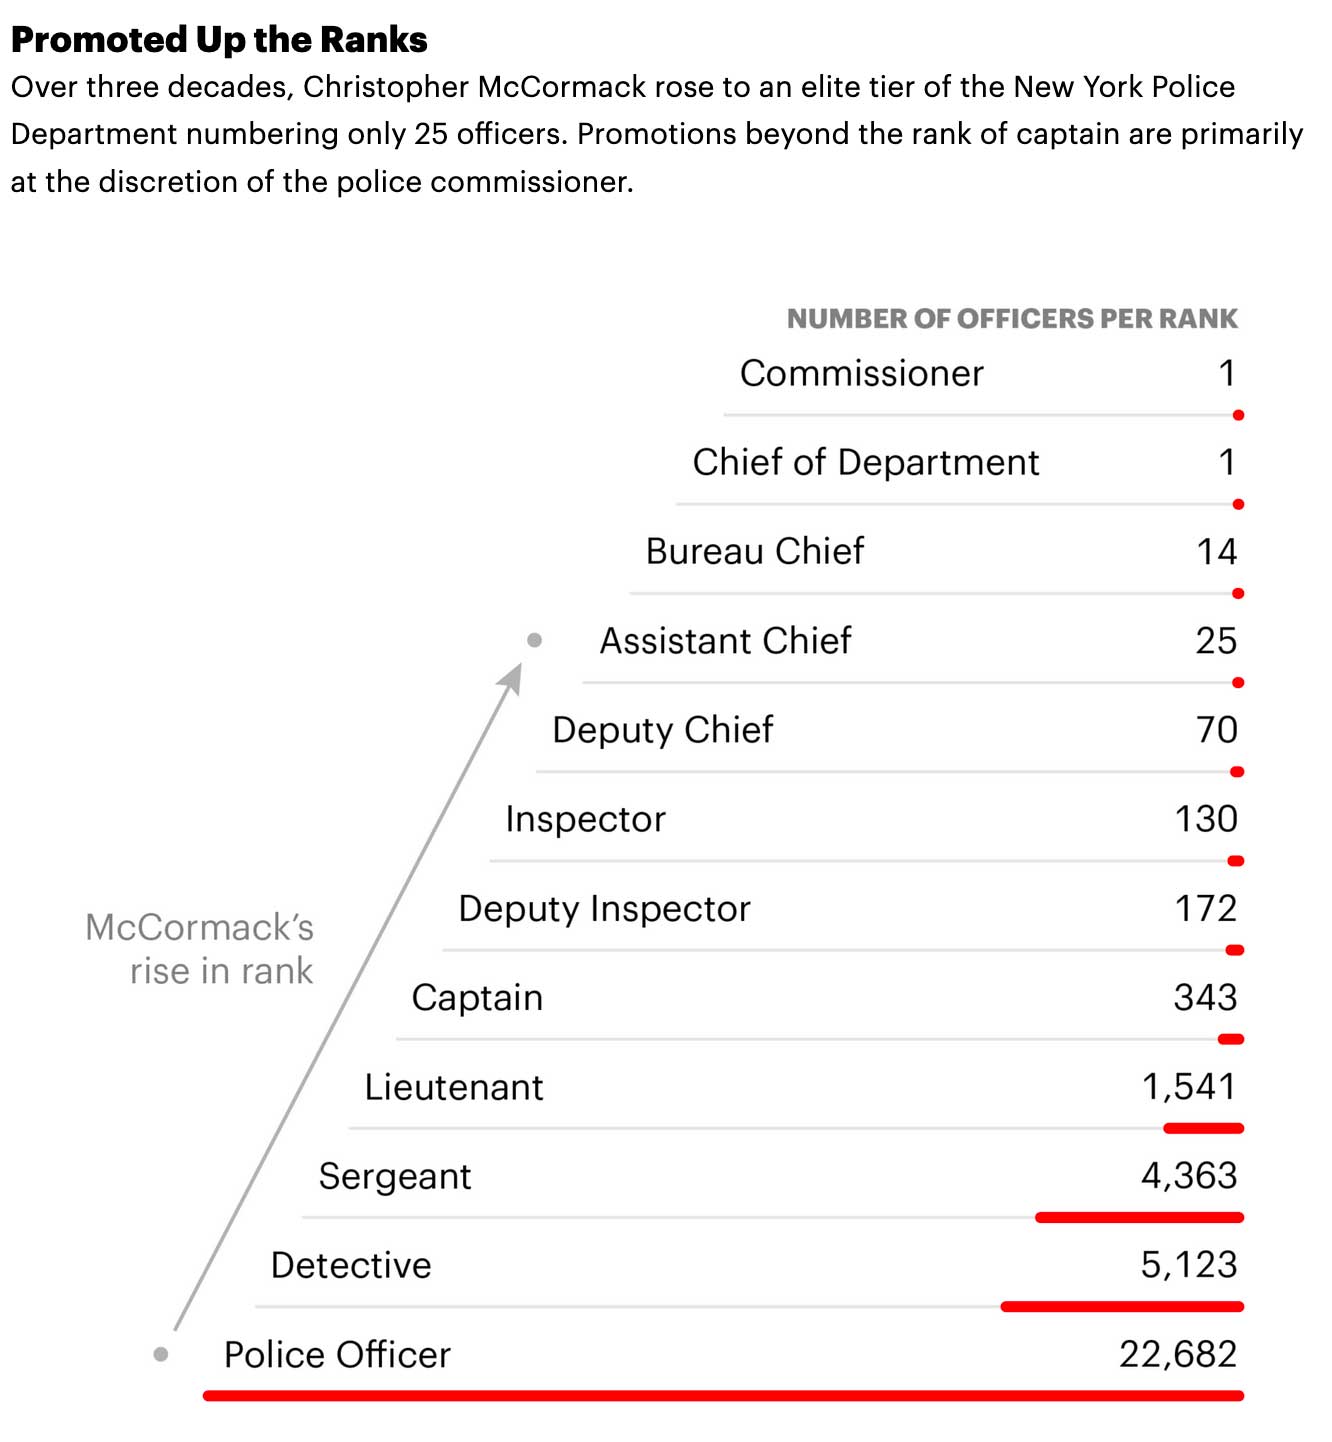 Sources: Independent Budget Office; NYPD (Rob Weychert / ProPublica and Allen Tan / ProPublica; research by Mollie Simon / ProPublica)